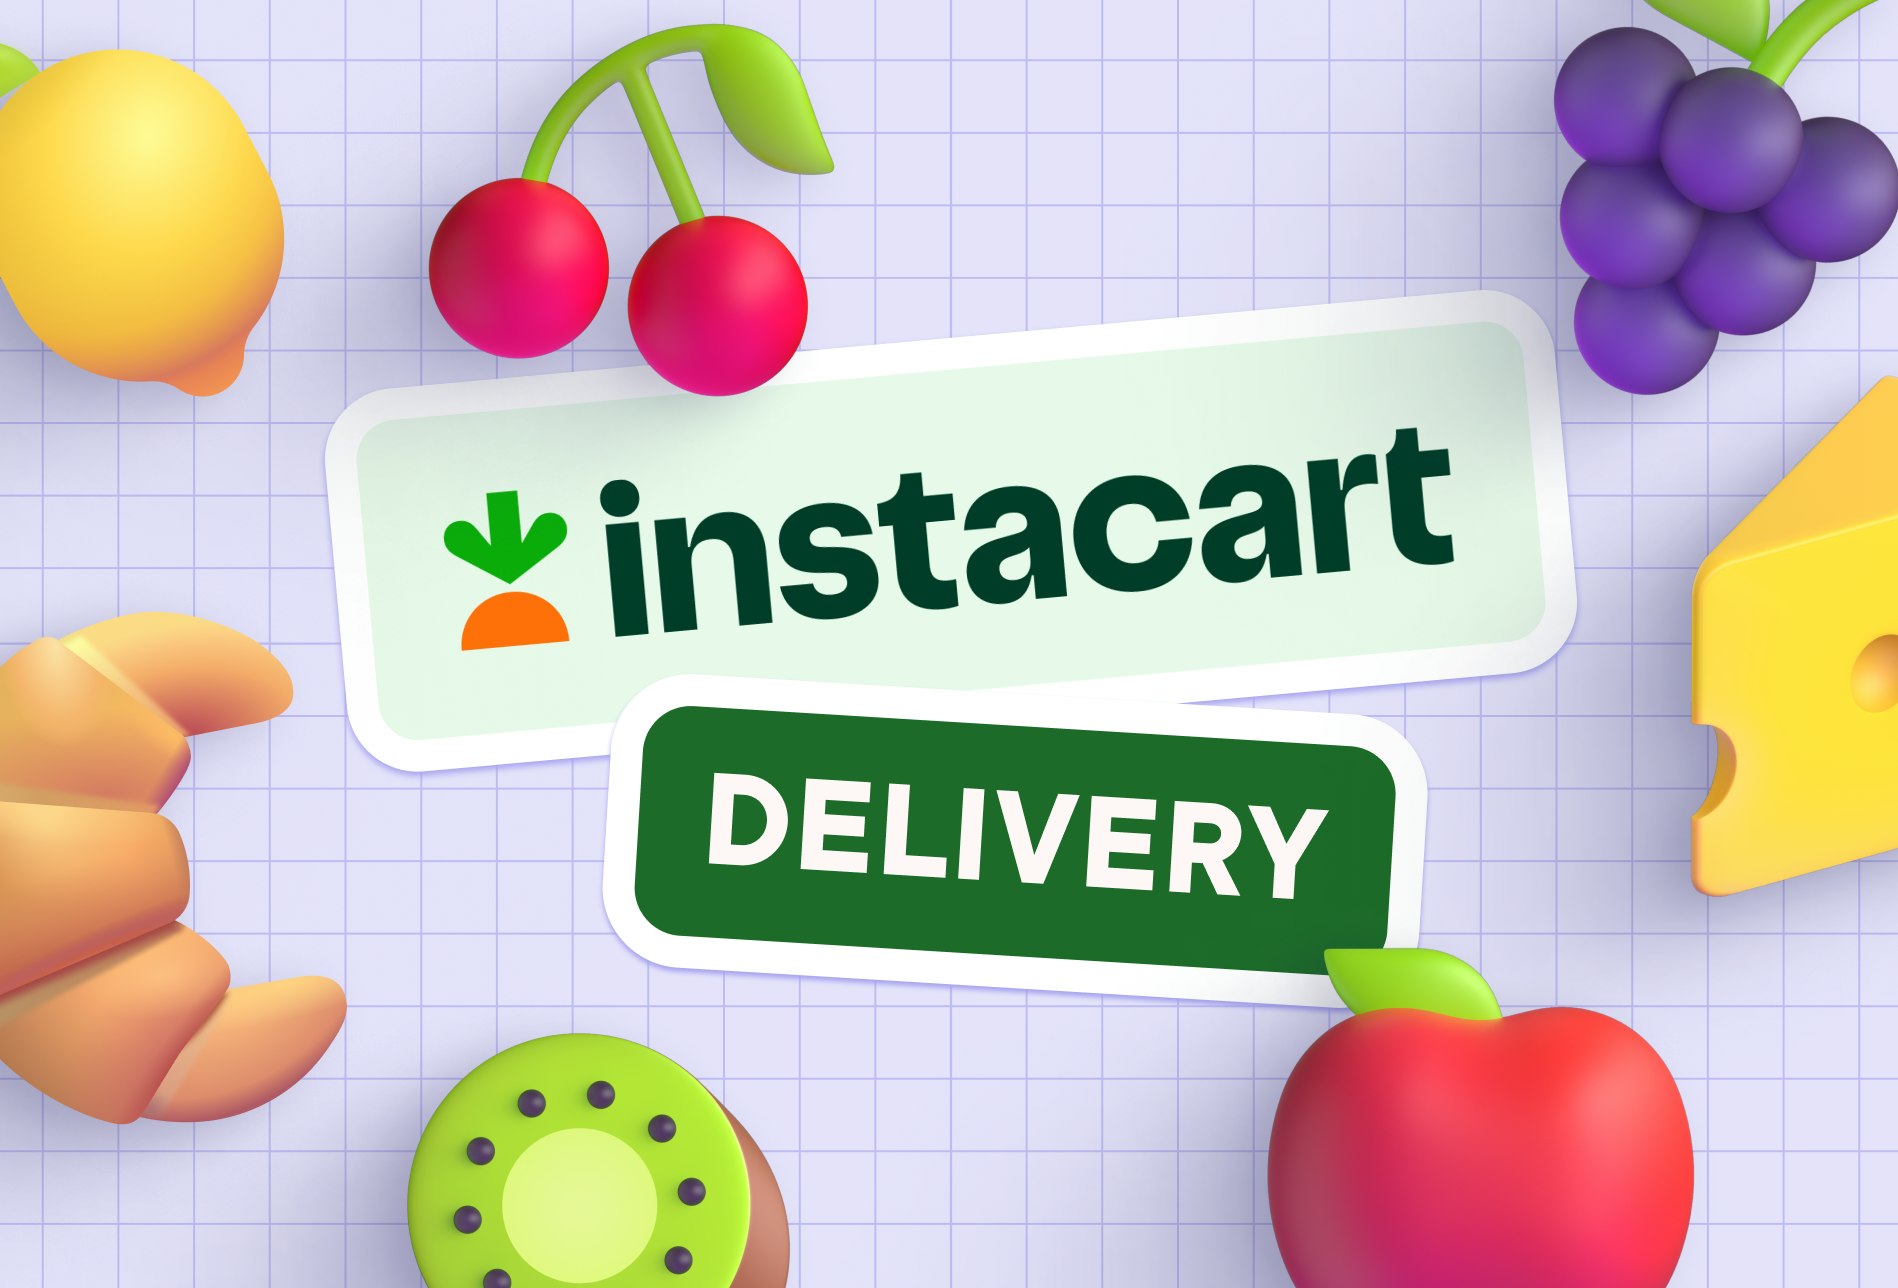 How to Get Free Delivery on Instacart: 6 Easy Ways